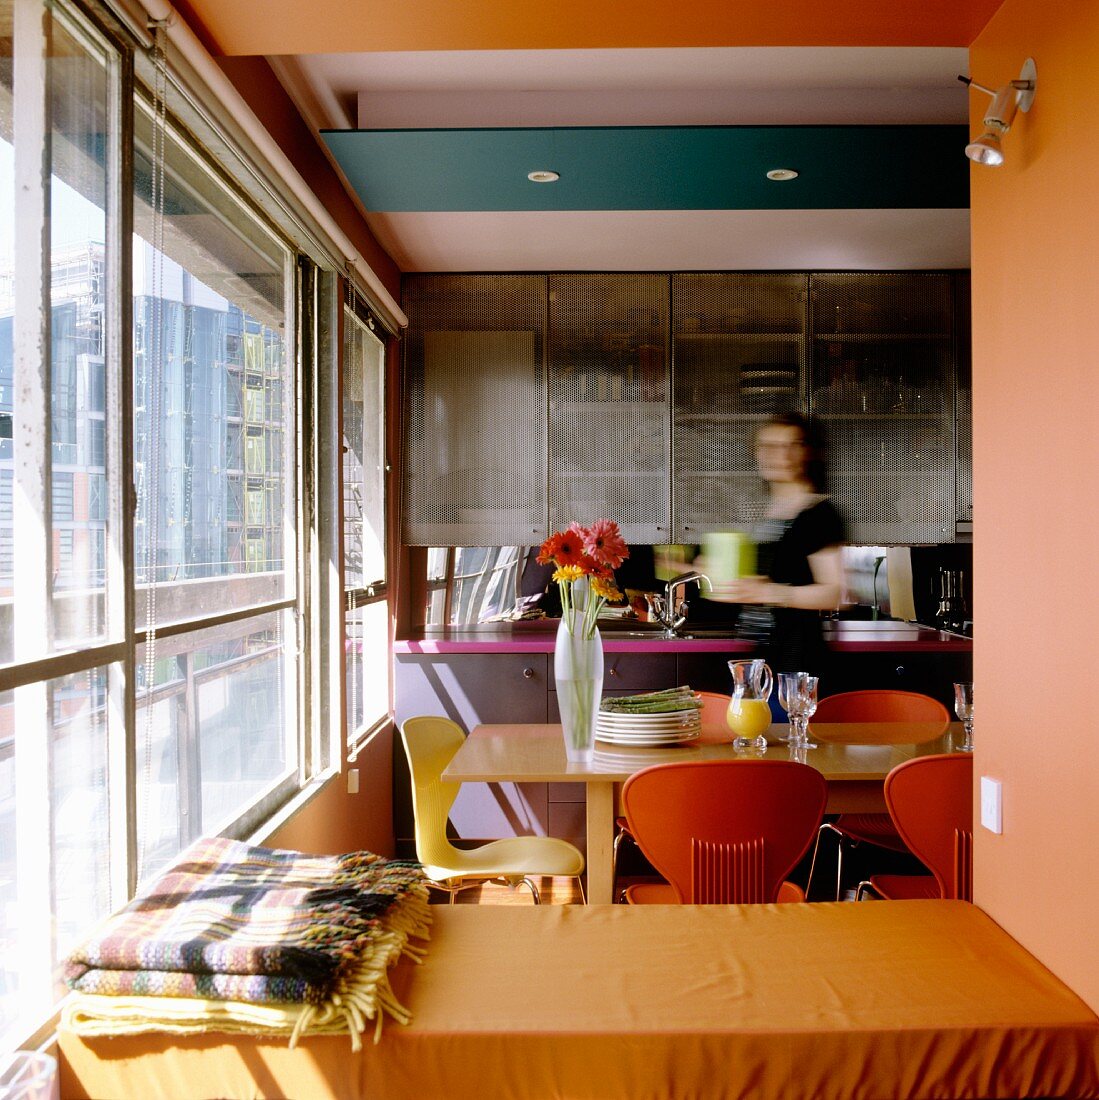 A view into an open-plan kitchen: a woman stands in the dining area with colored chairs in front of a glass facade